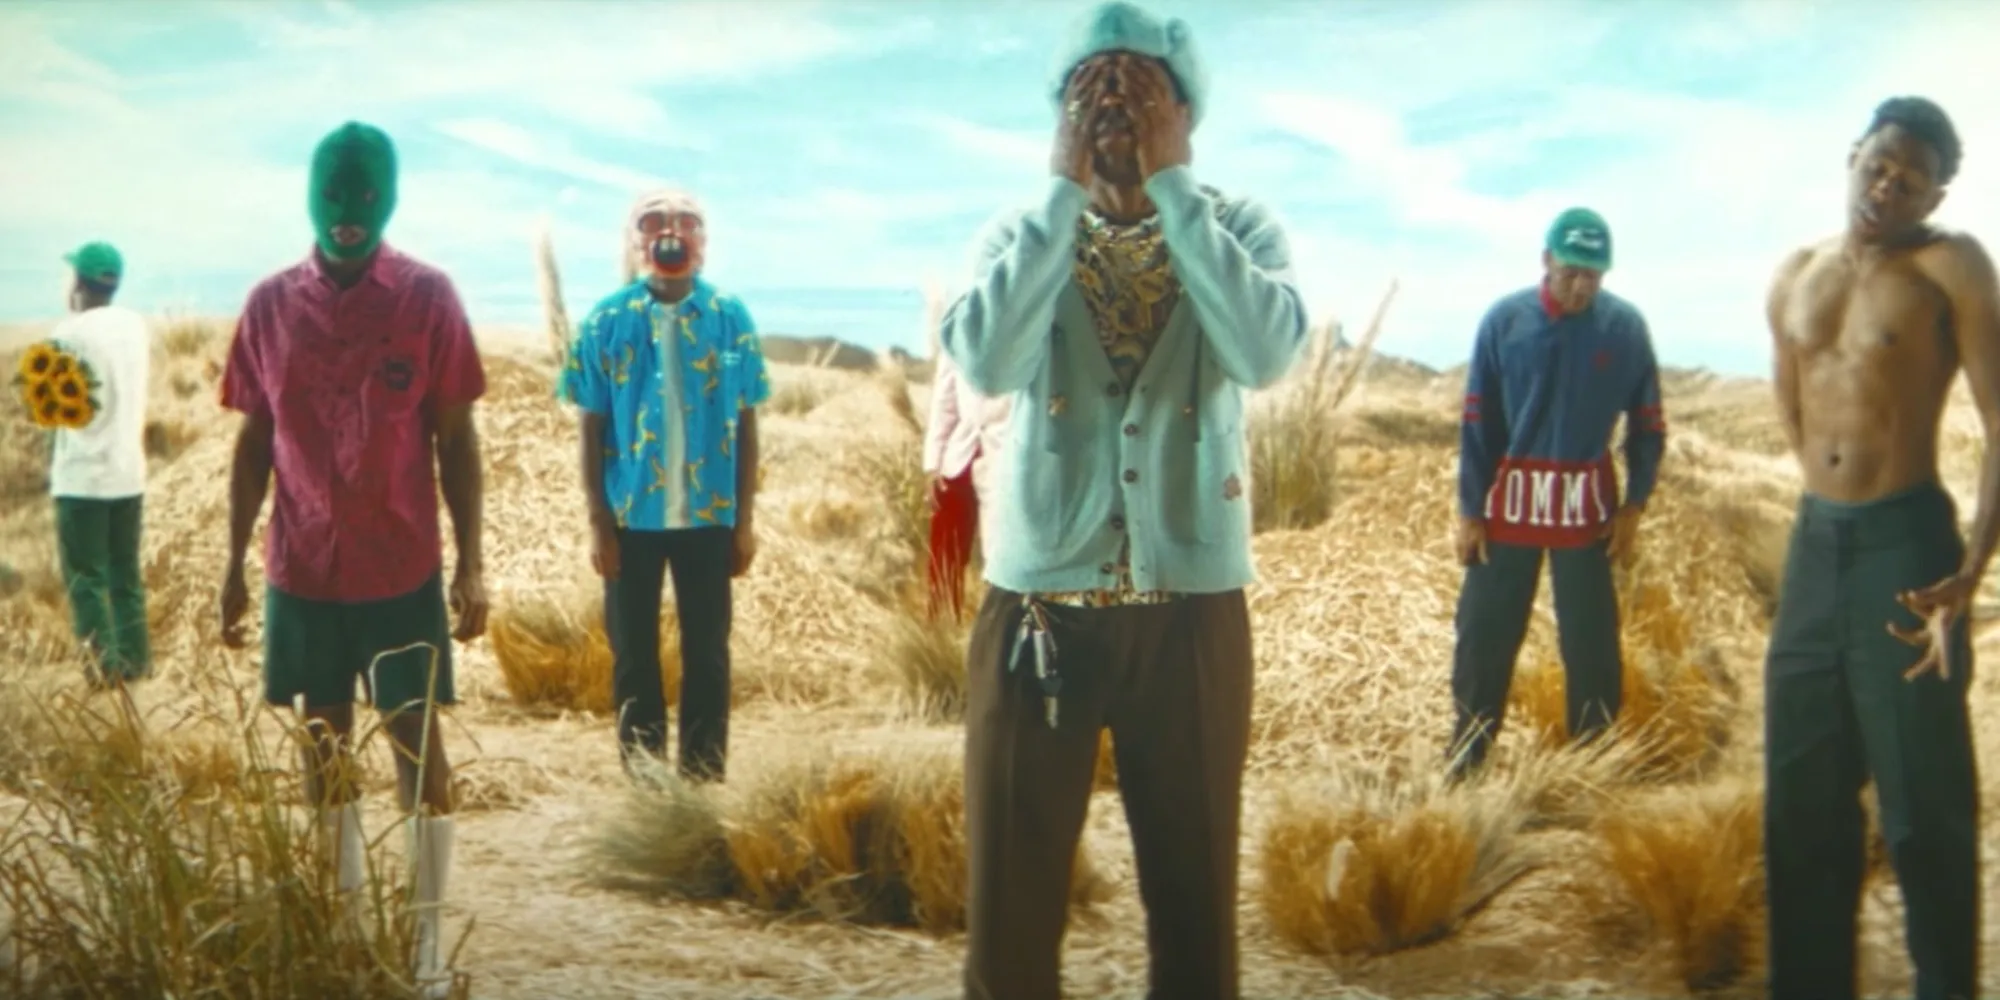 Tyler, the Creator drops his new music video for Sorry Not Sorry.